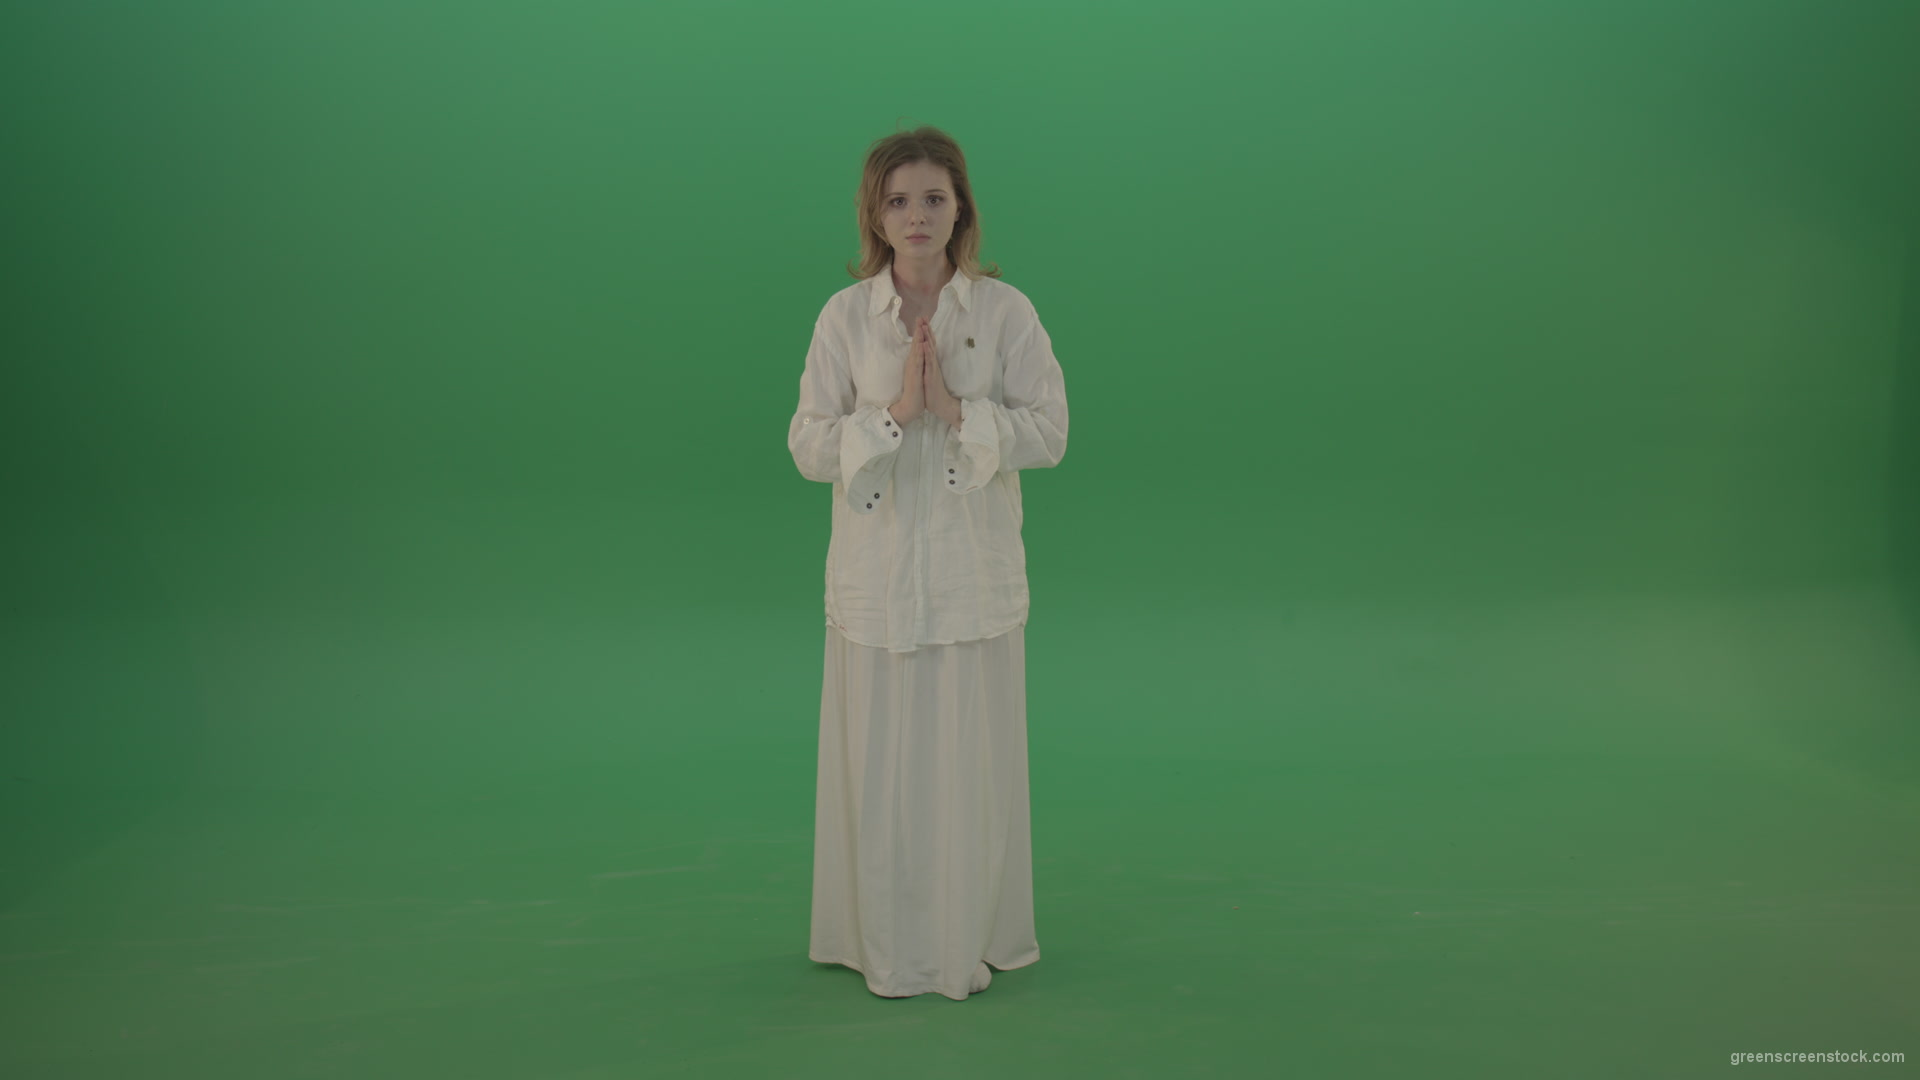 vj video background Girl-wearing-a-white-suit-pray-to-god-isolated-on-green-background_003